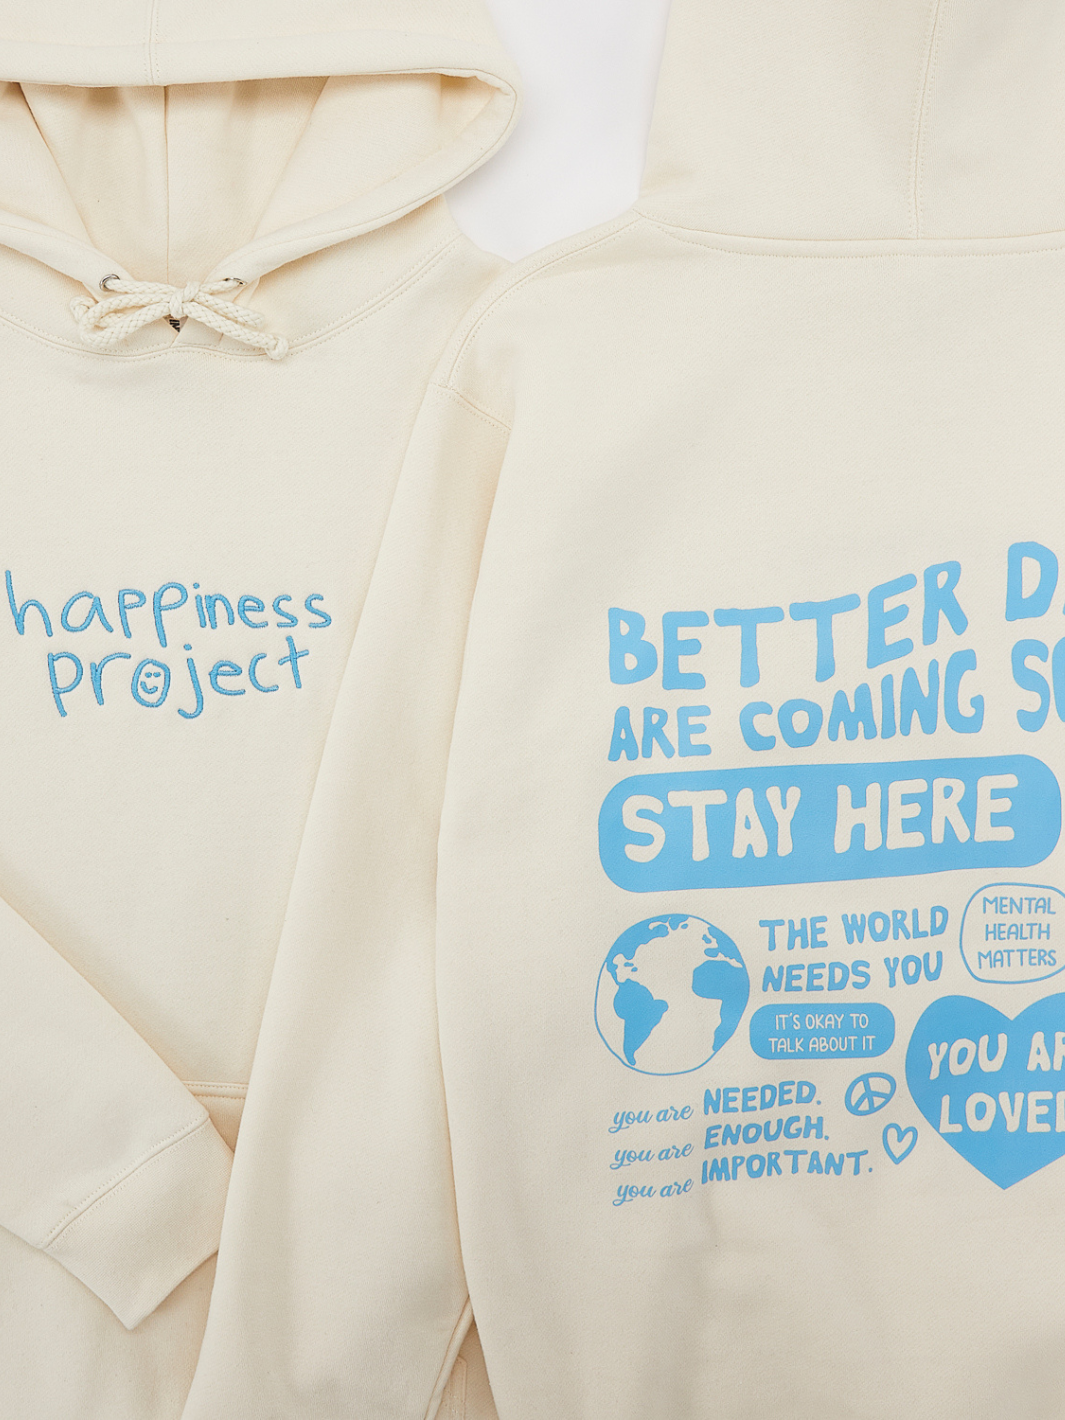 Better Days Ahead Hoodie #color_cream